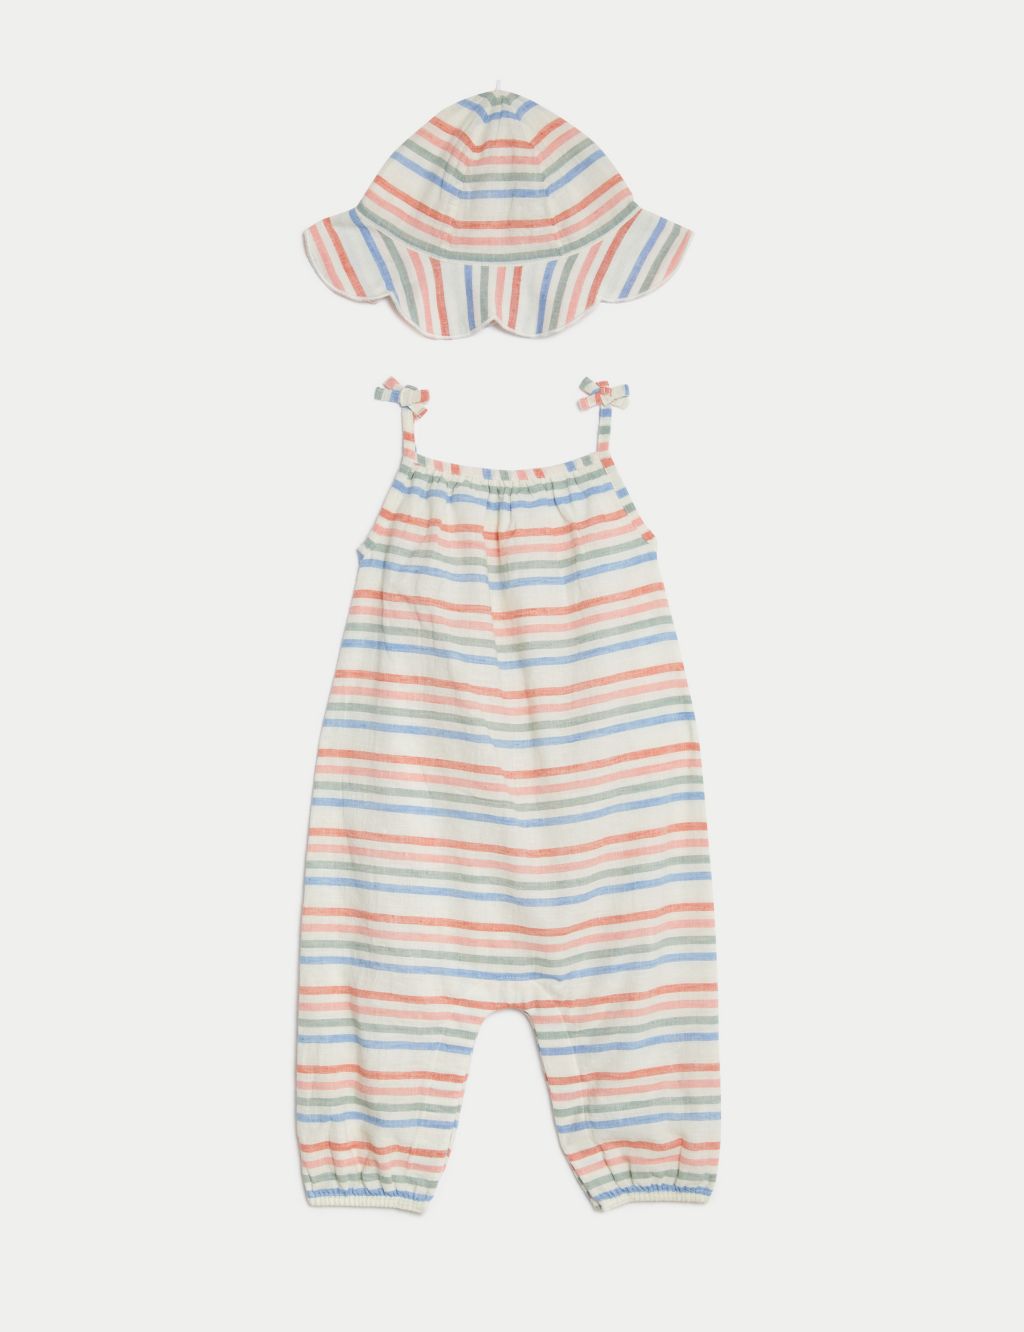 2pc Cotton Rich Striped Outfit (0-3 Yrs) image 1